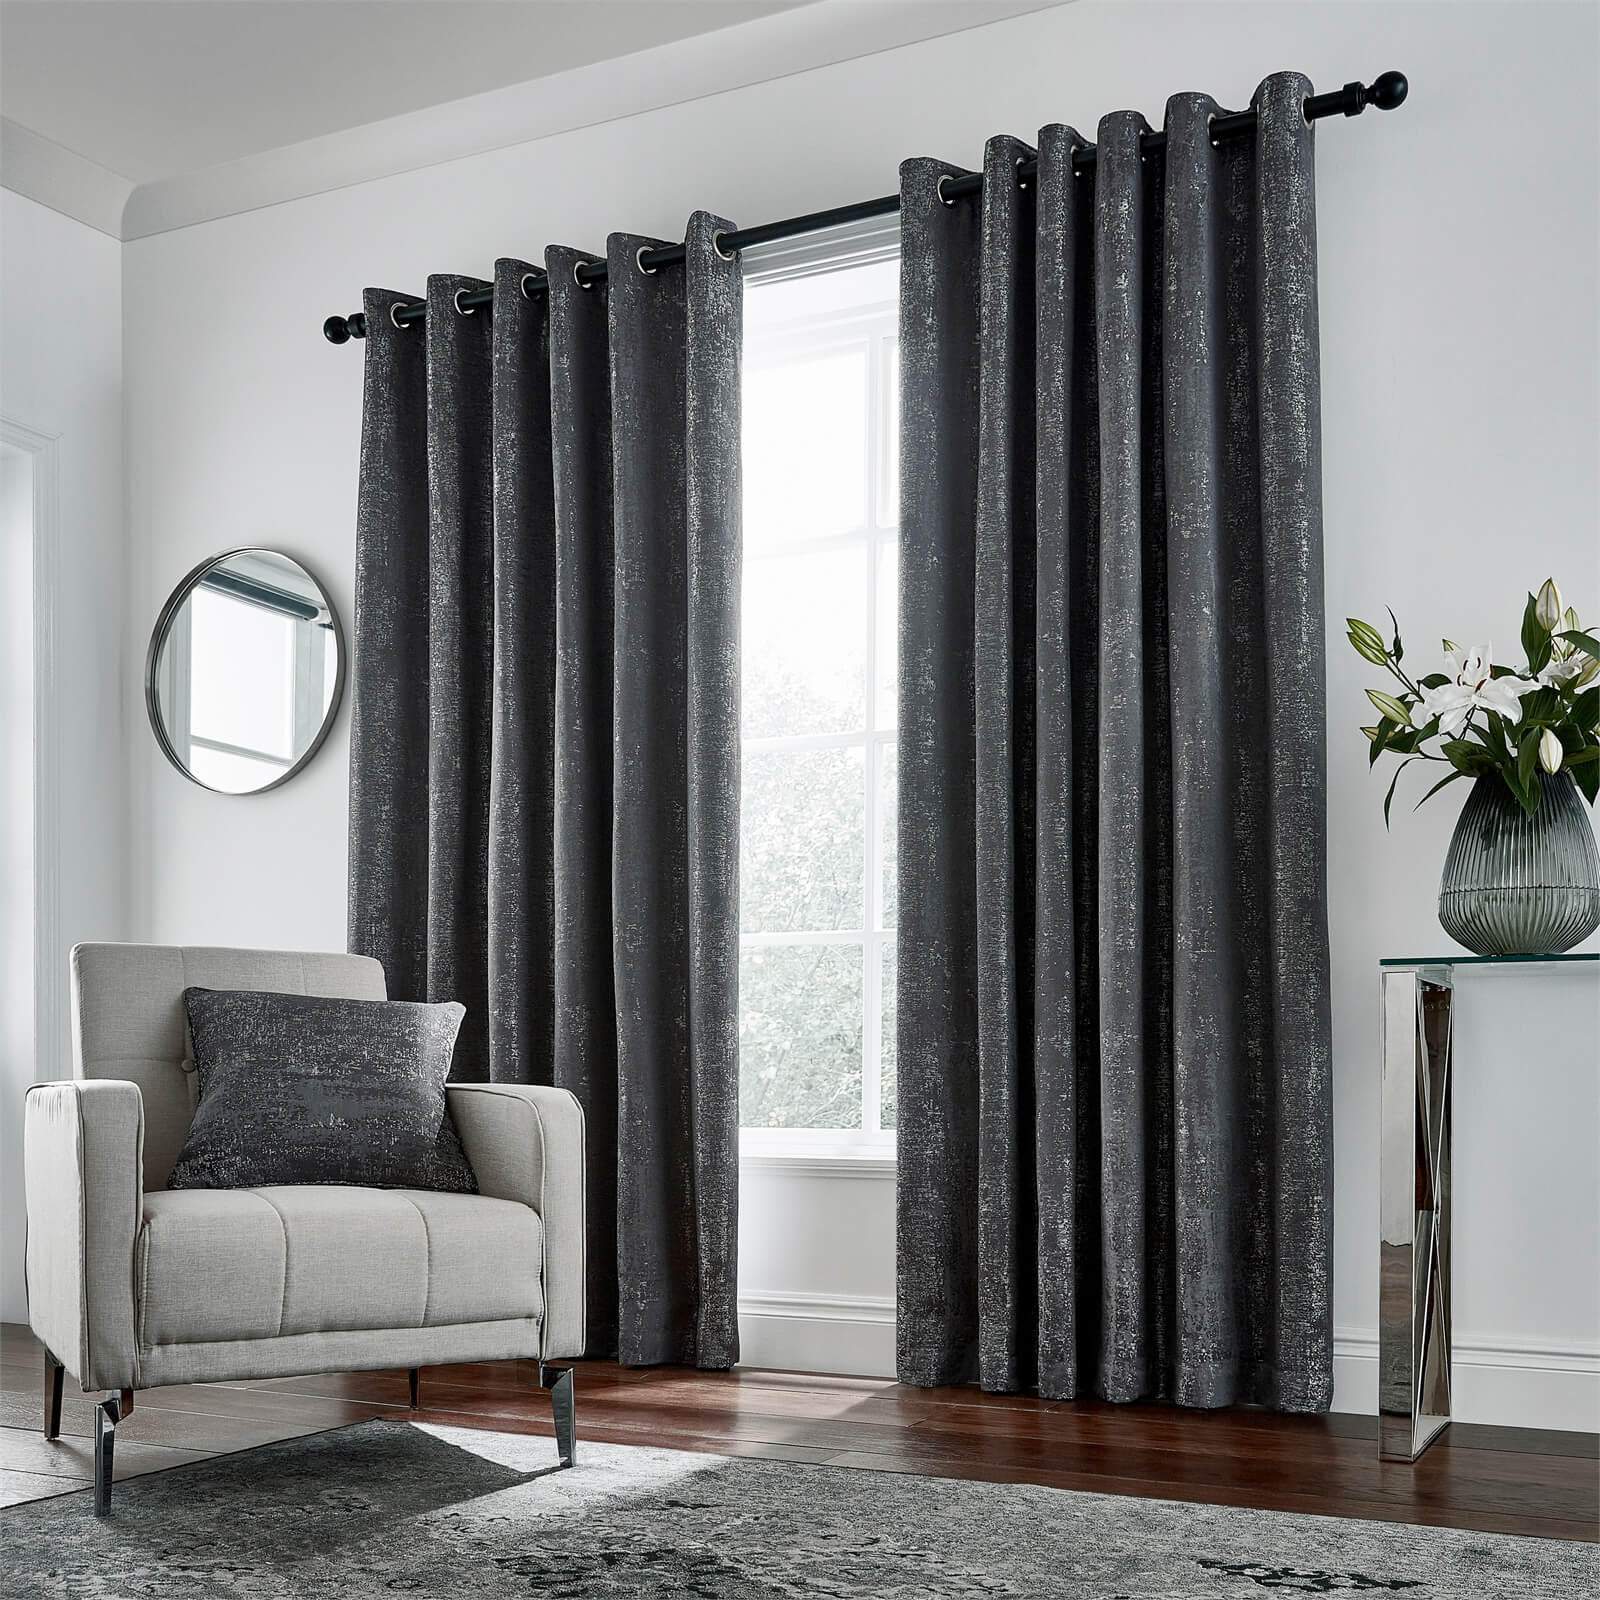 Peacock Blue Hotel Collection Roma Lined Curtains 90 x 72 - Gunmetal